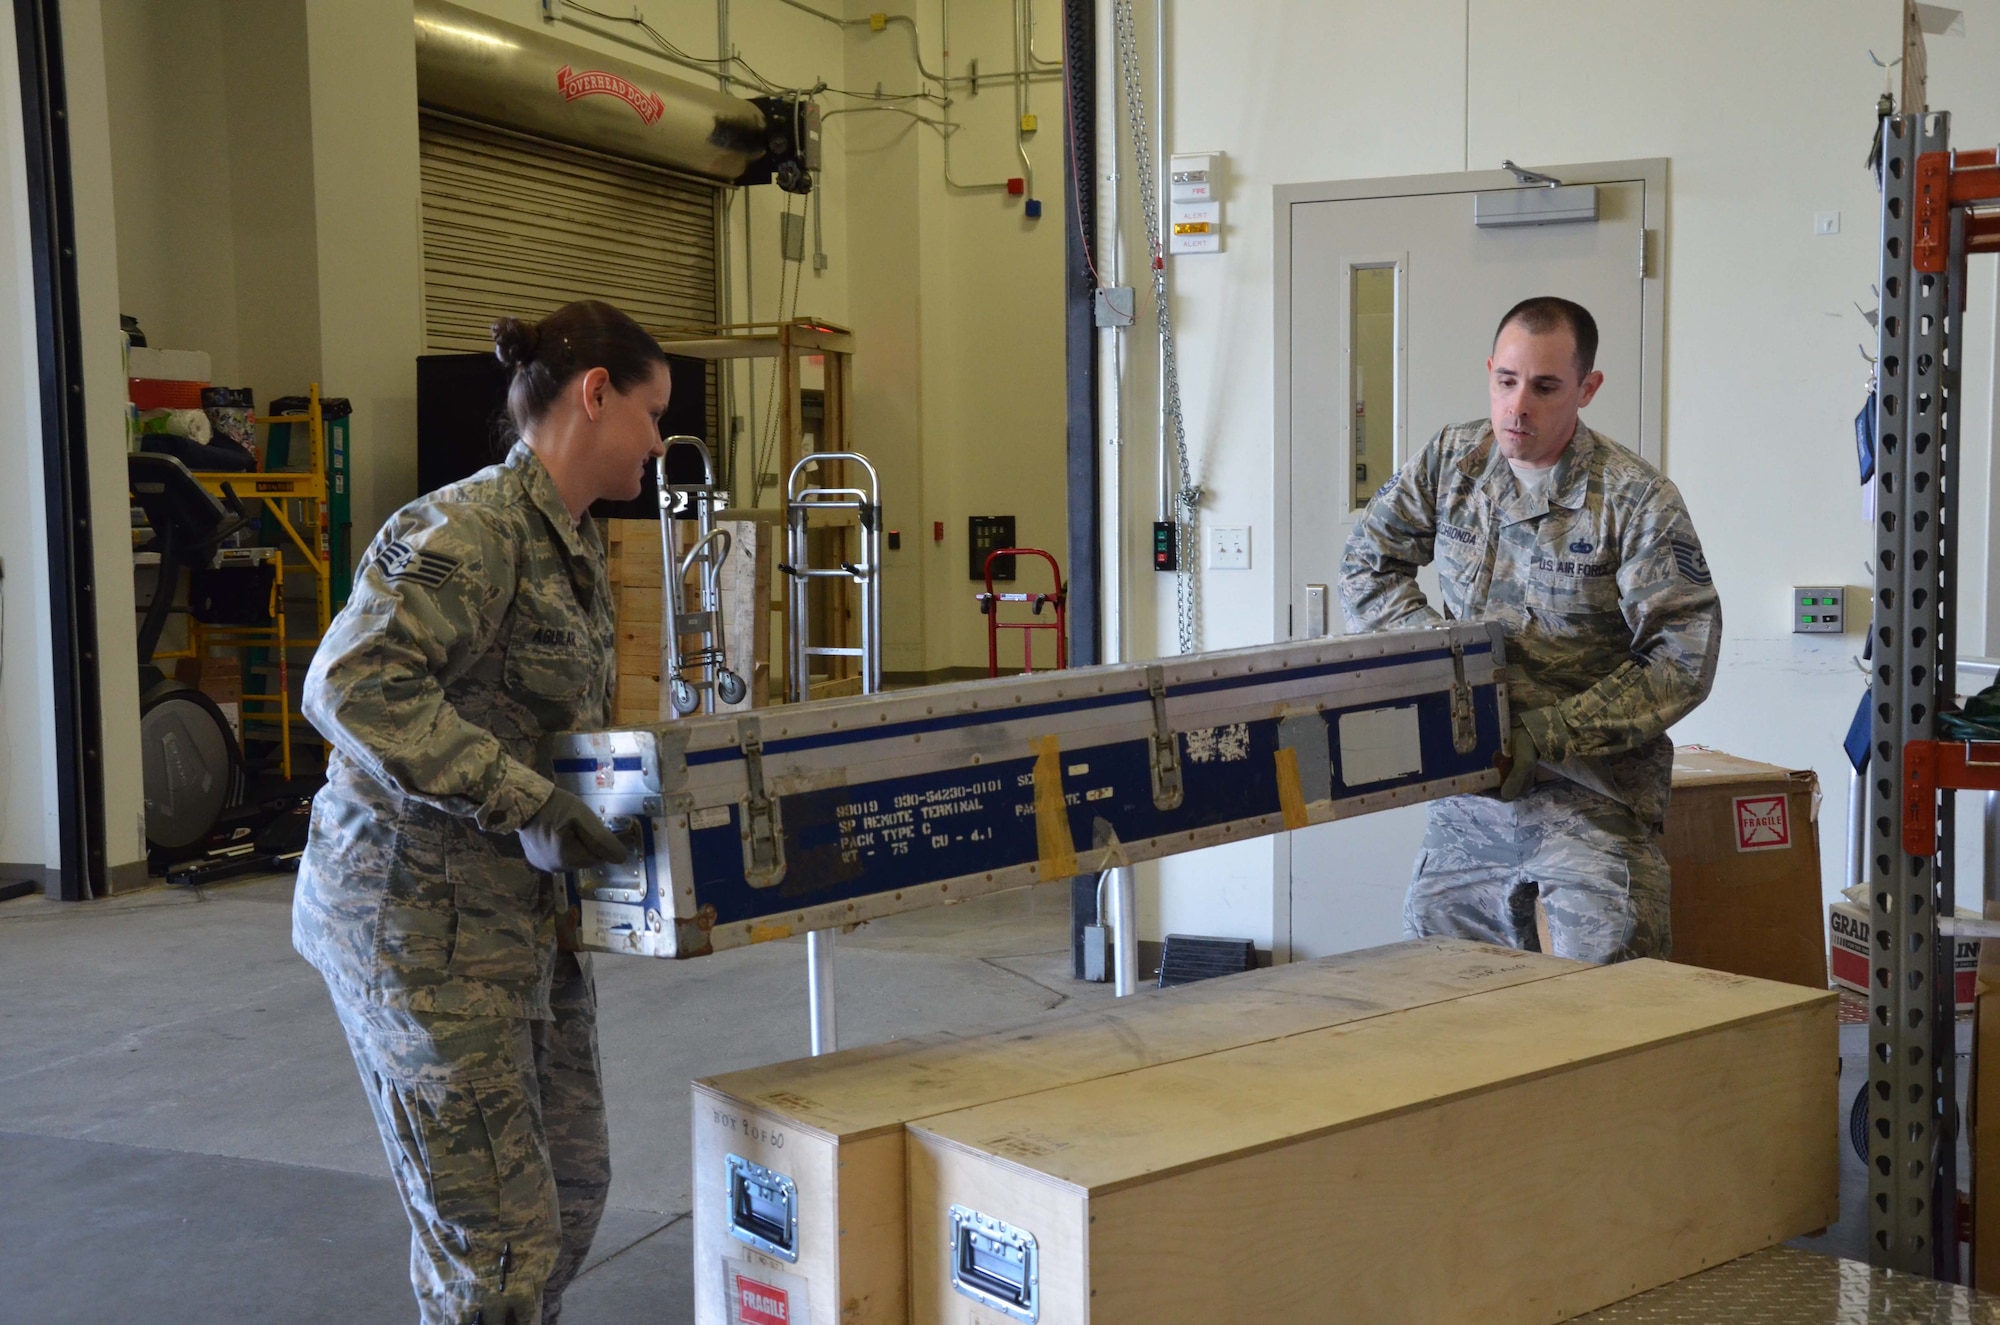 Staff Sgt. Ashley Aguilar and Tech. Sgt. Mark Melchionda, both members of the 709th Support Squadron at the Air Force Technical Applications Center, Patrick AFB, Fla., carefully relocate a shipment of seismic equipment the center uses for its global nuclear treaty monitoring mission.